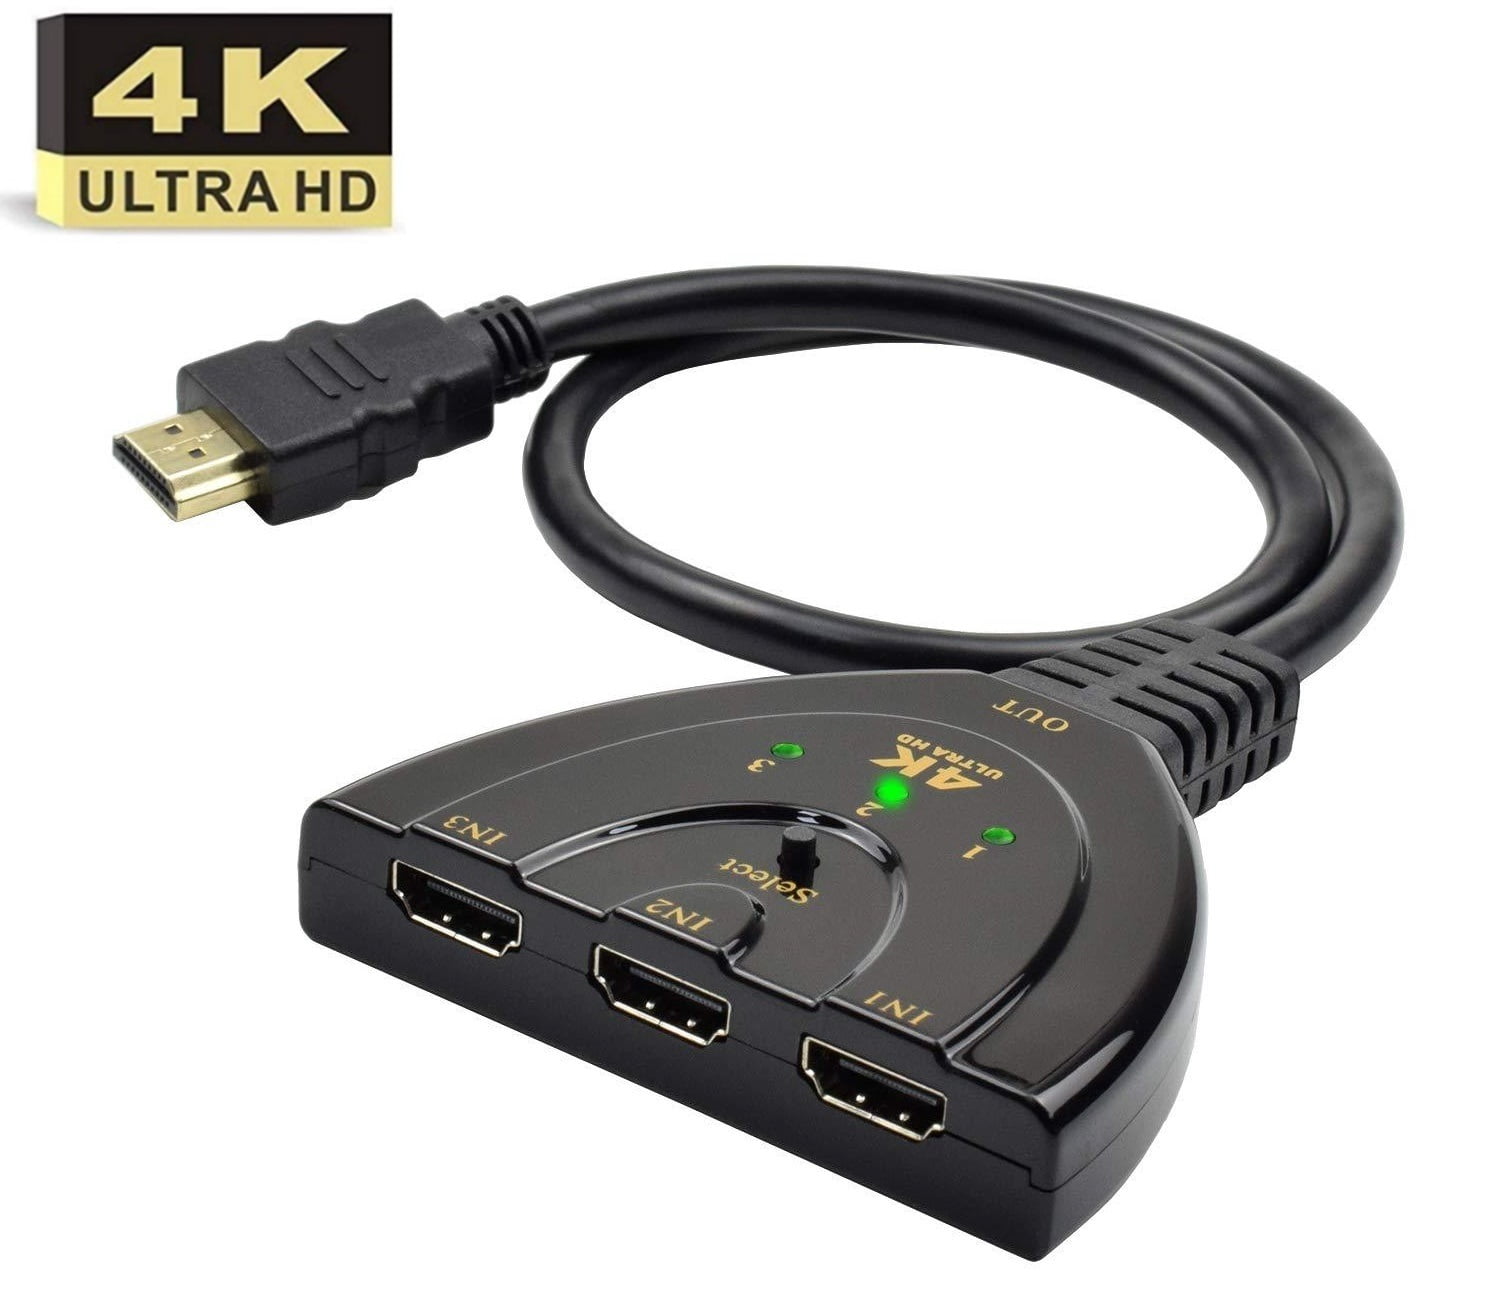 3 Port 4K HDMI Switch 3 in 1 Out with High Speed Switch Splitter Pigtail Cable Supports Full HD 4K 1080P 3D Player HDMI Switch